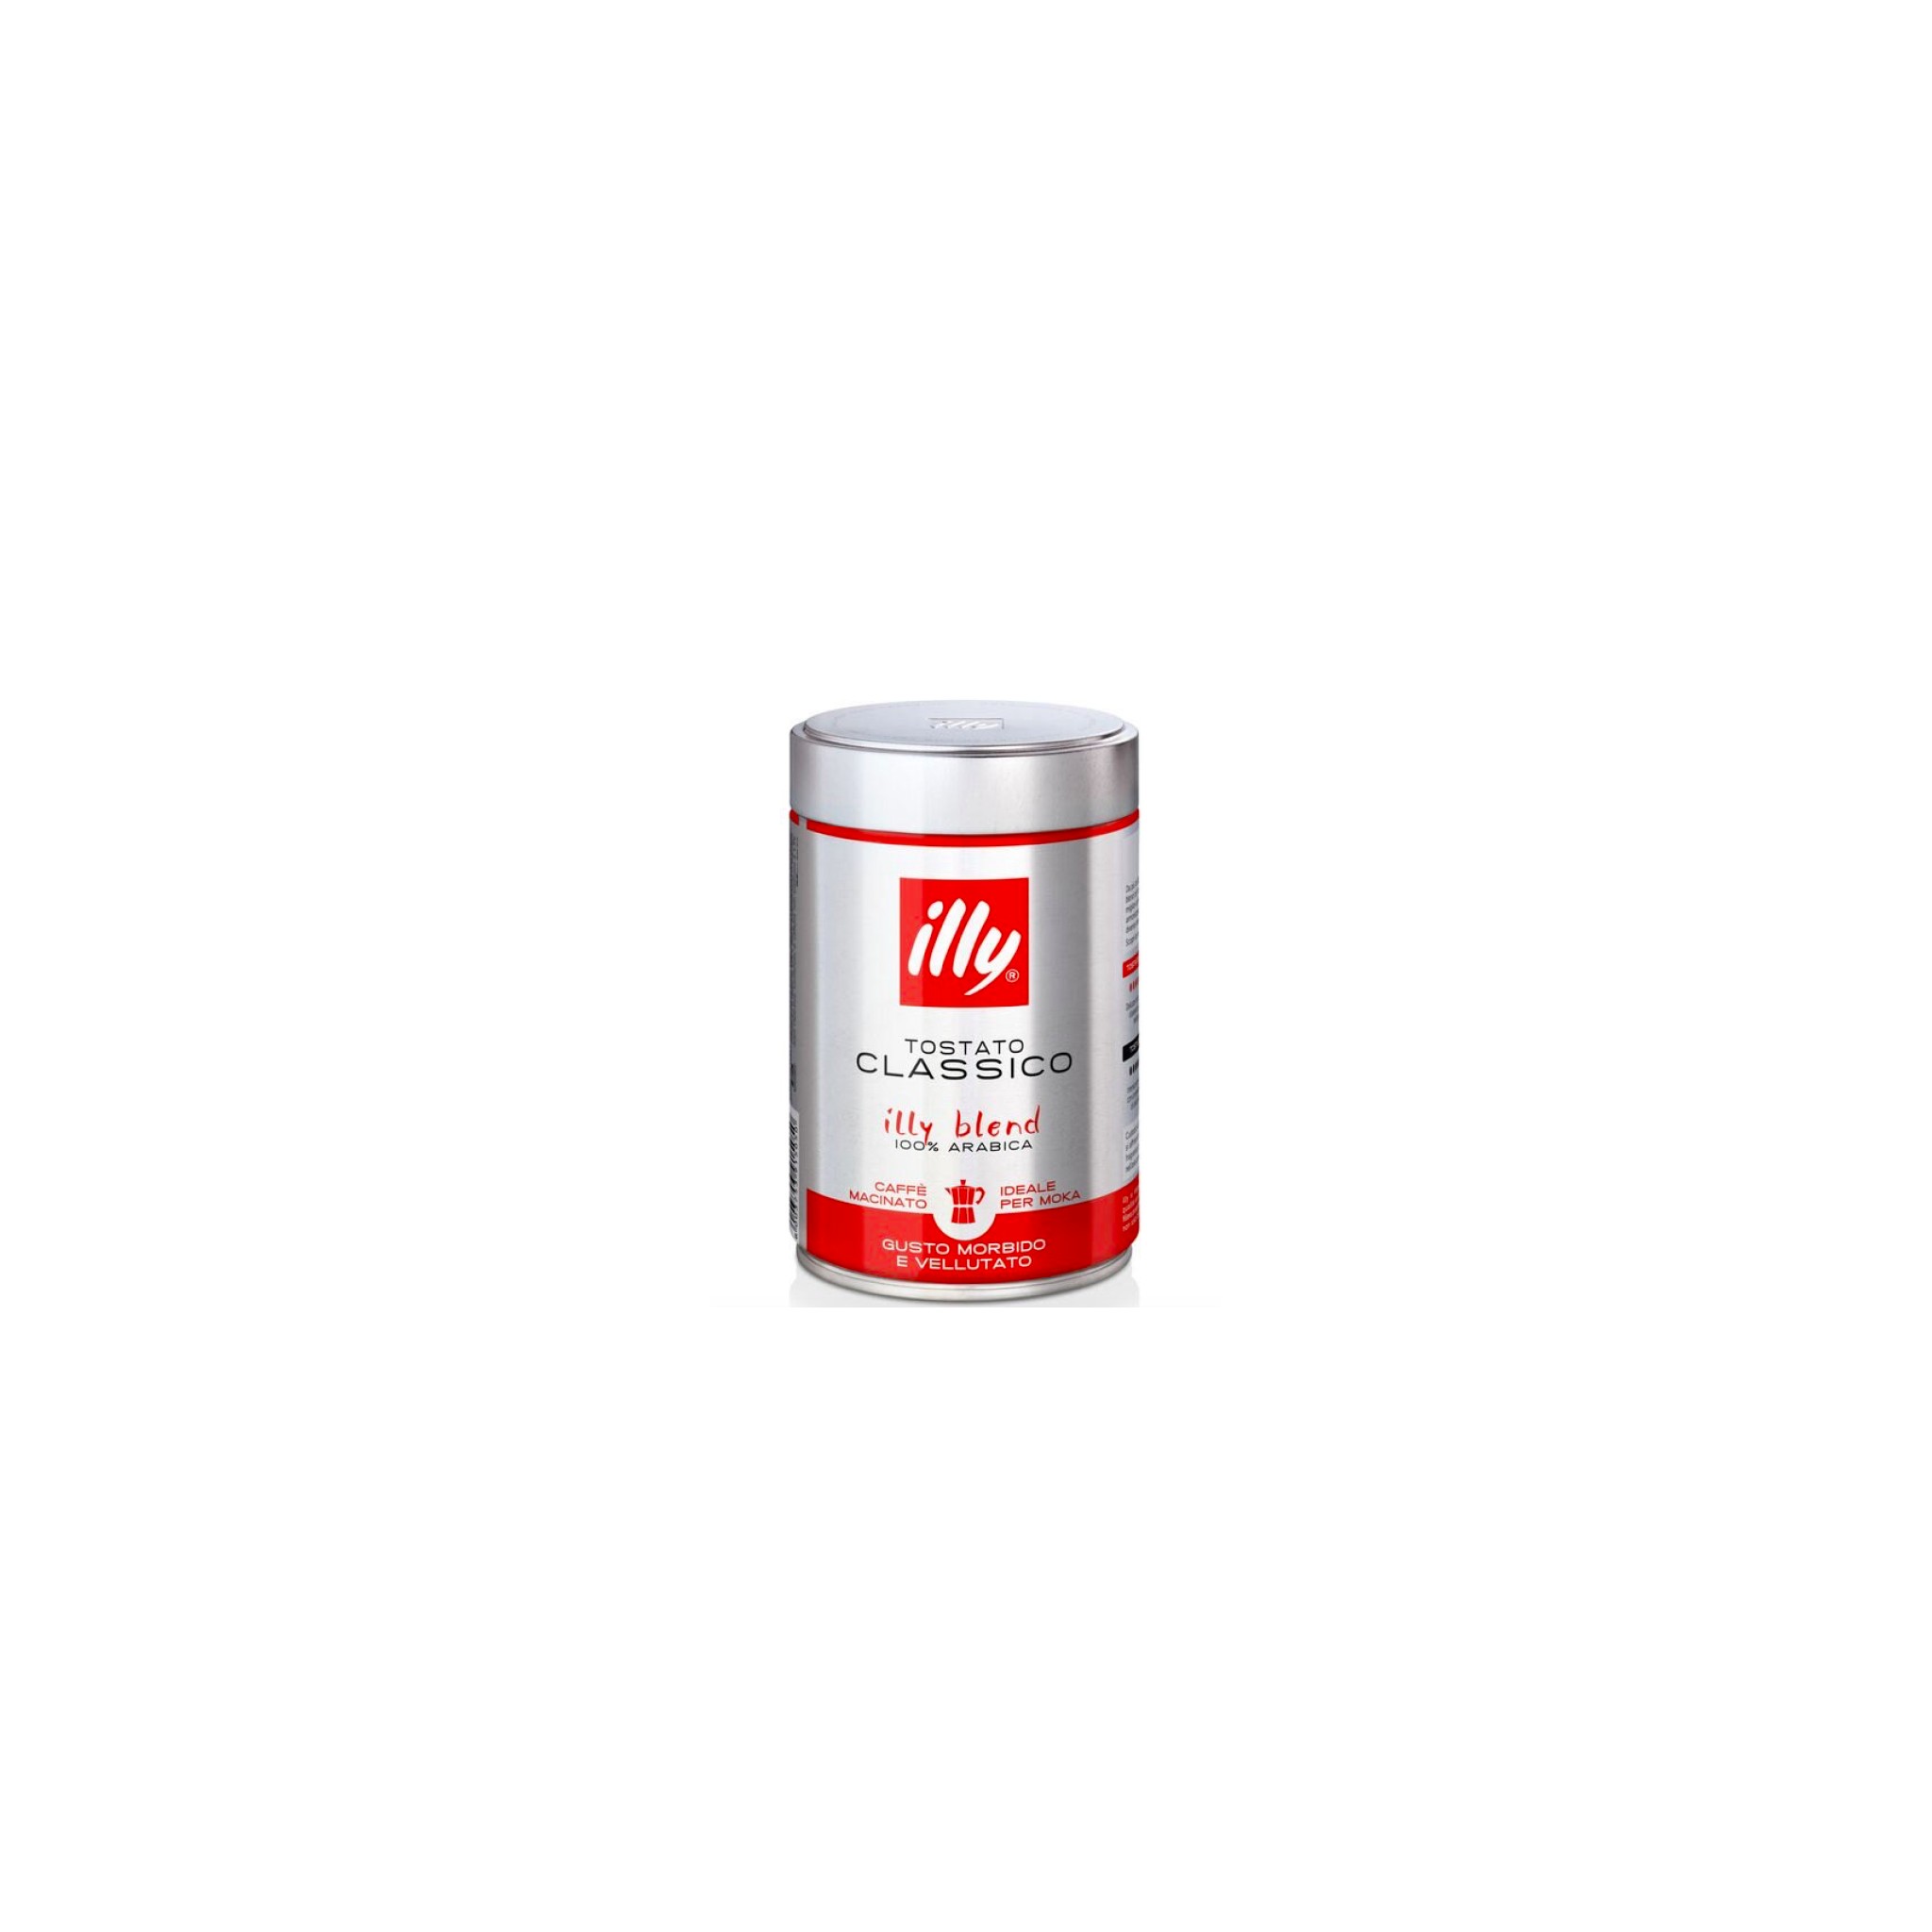 Online Sale JARS PRESSURIZED OF GROUND AND BEANS COFFE ILLY 250g. Vulpitta  Corso 101